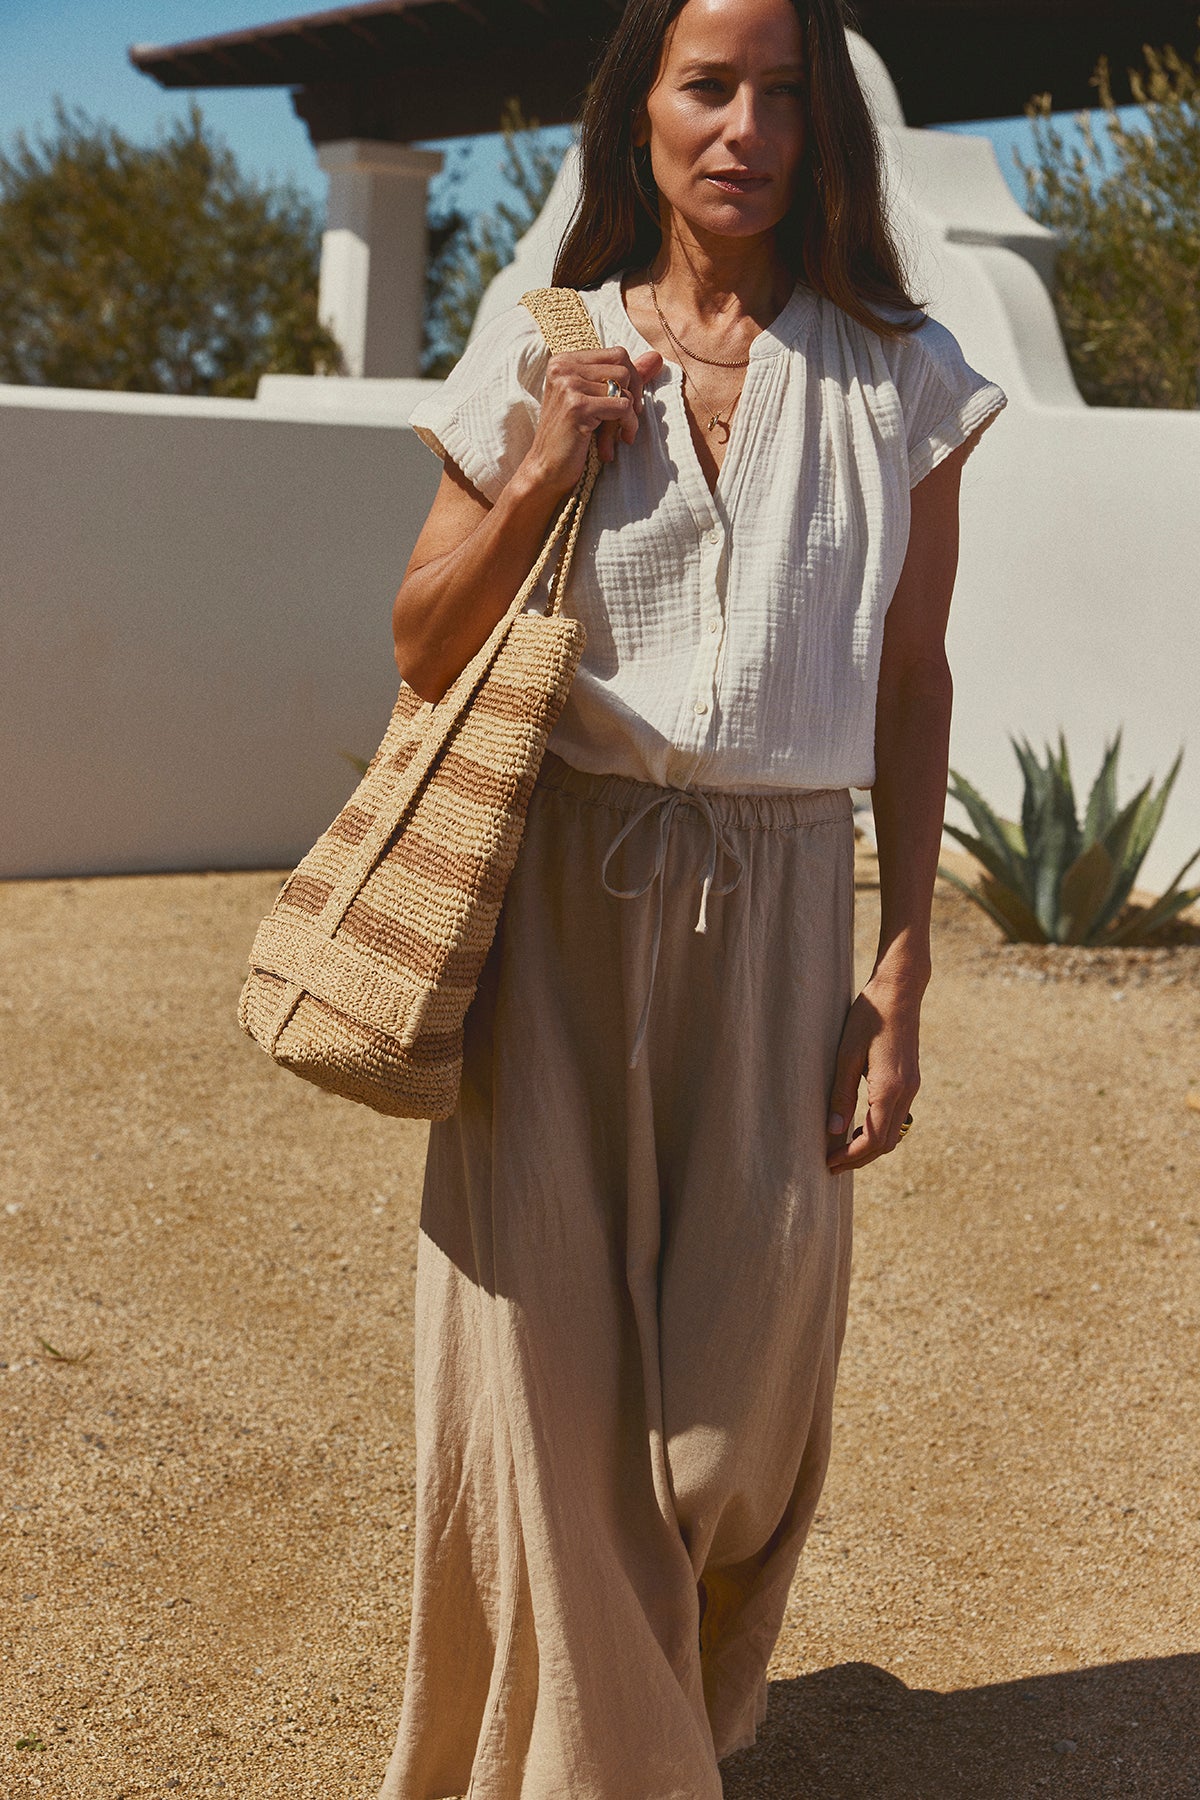 A woman in a Pamela Cotton Gauze Button-Up Top by Velvet by Graham & Spencer and beige pants carrying a straw tote bag stands in a sunny courtyard with a white wall and cactus in the background.-36571144650945